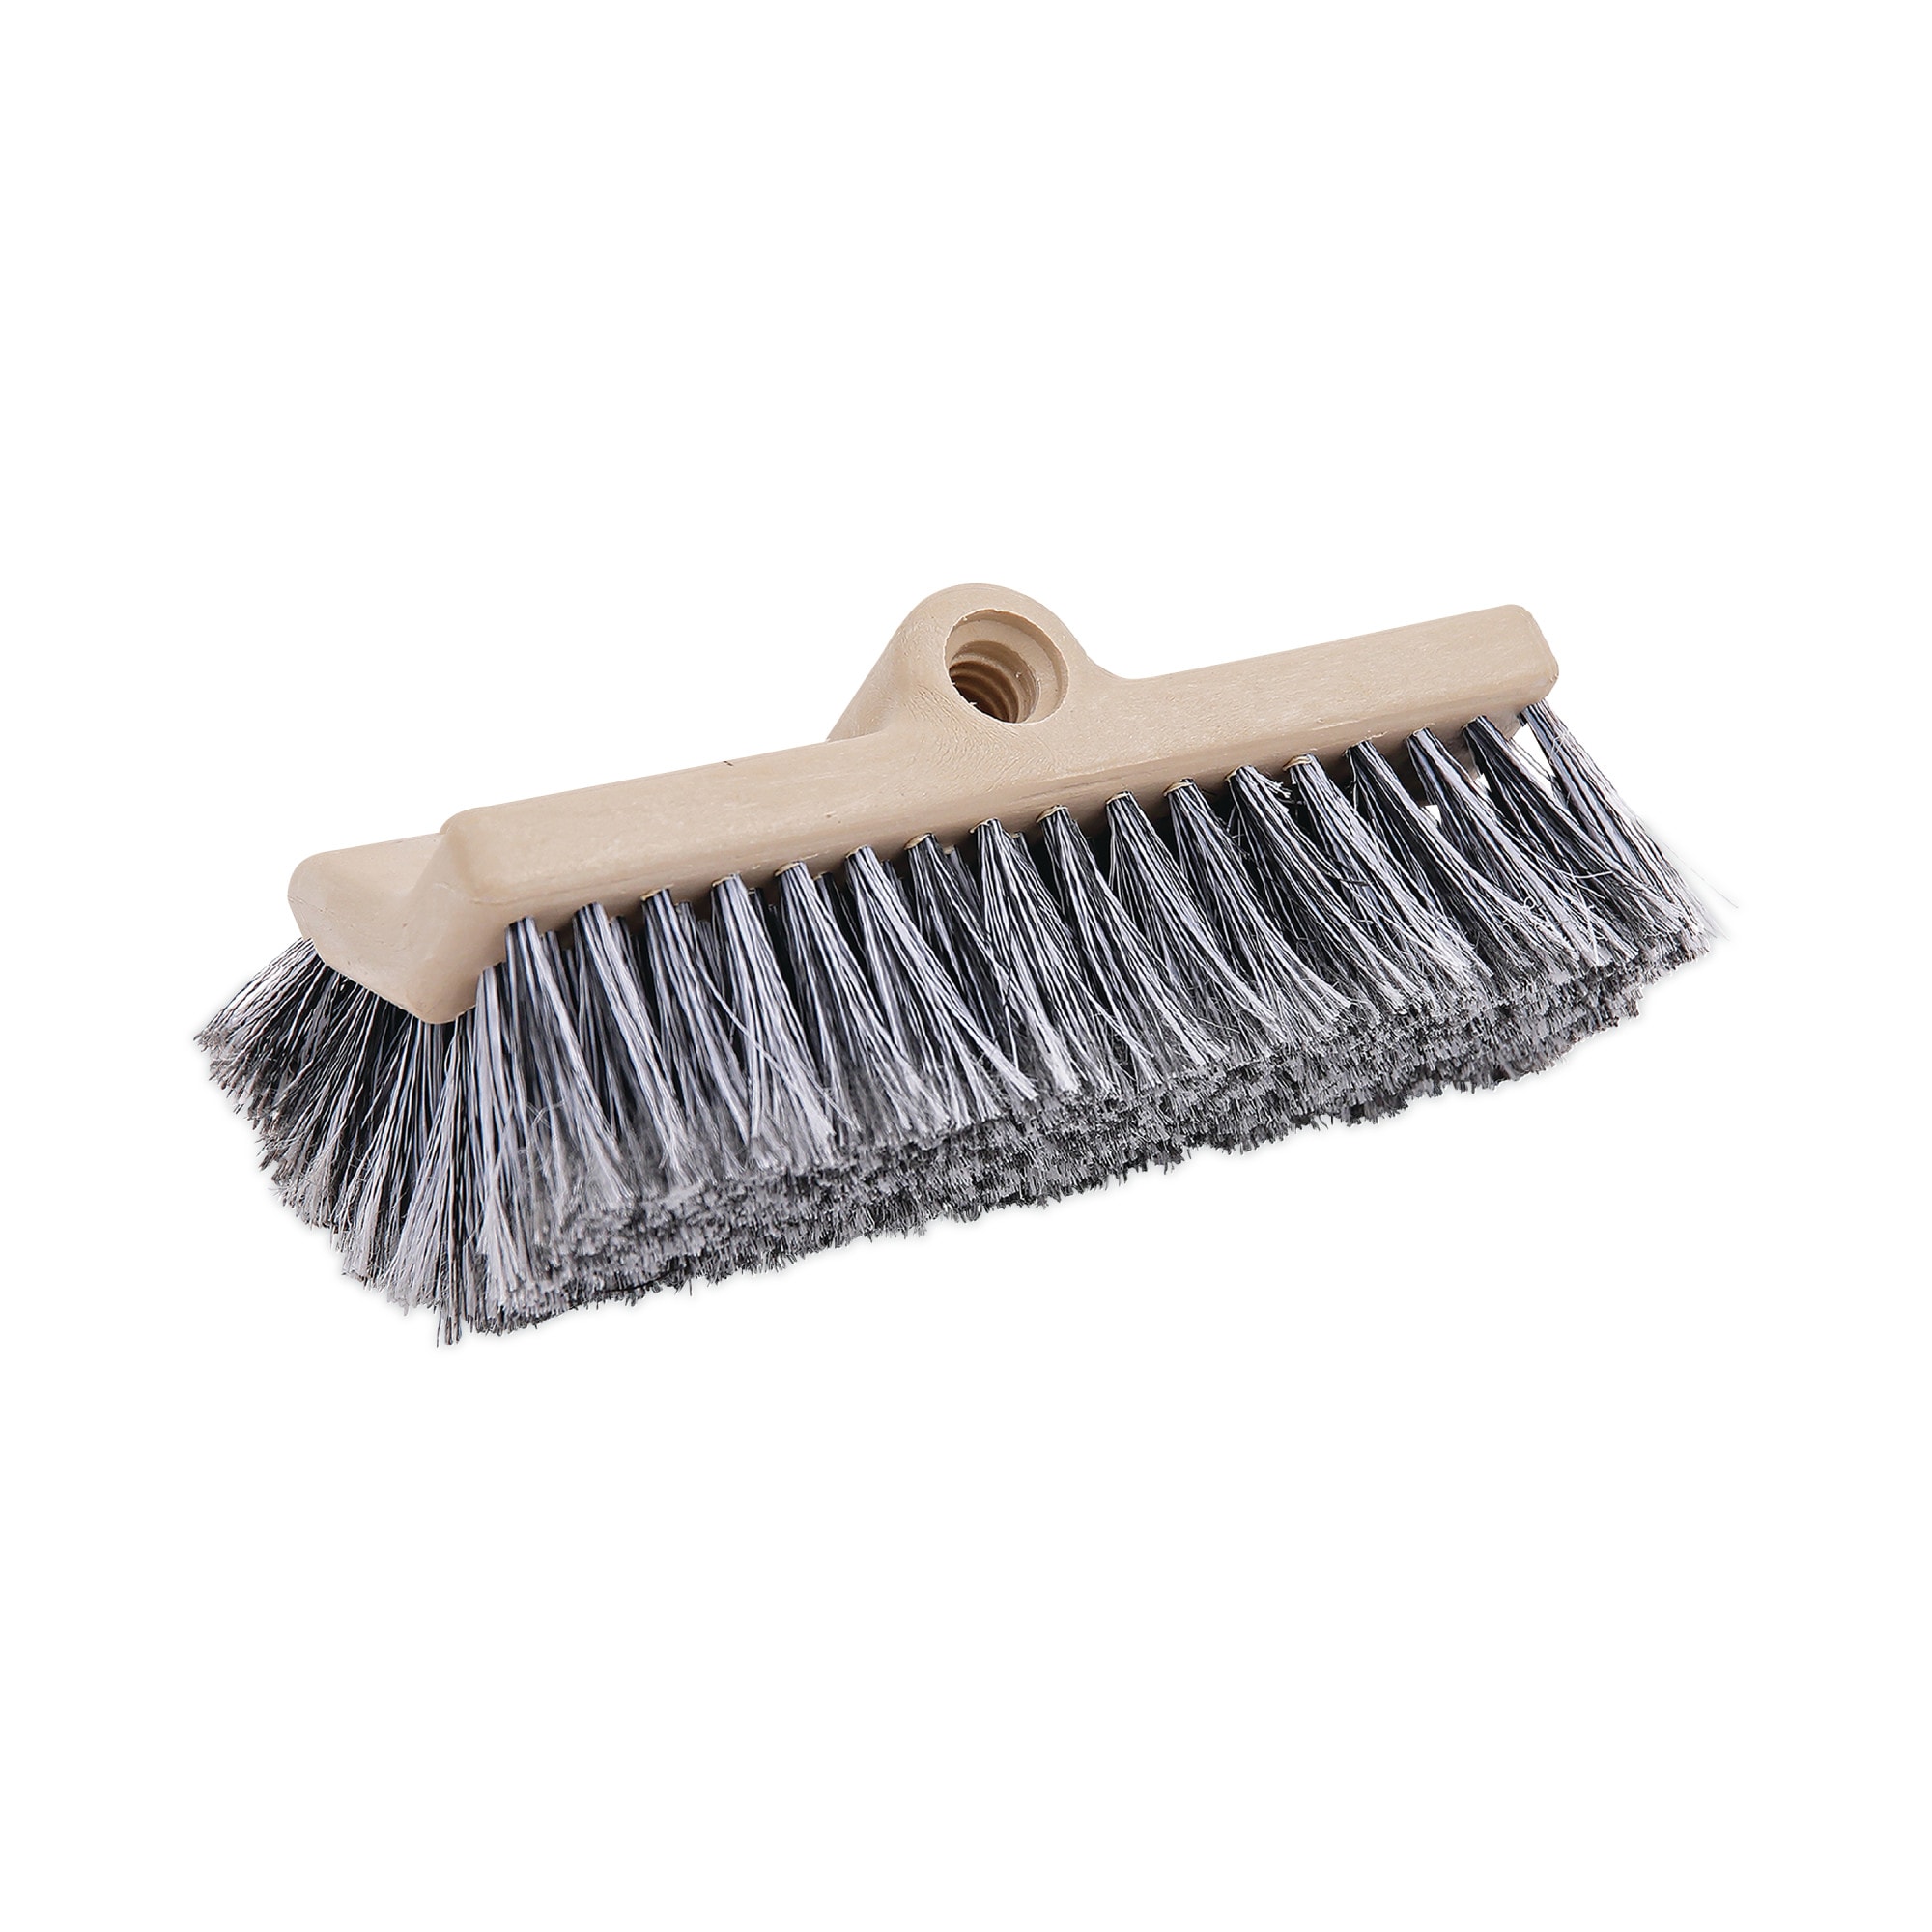 The 5 Best Types Of Cleaning Brushes And Their Uses - Eloise's Cleaning  Services - Best House Cleaning in Wilmington